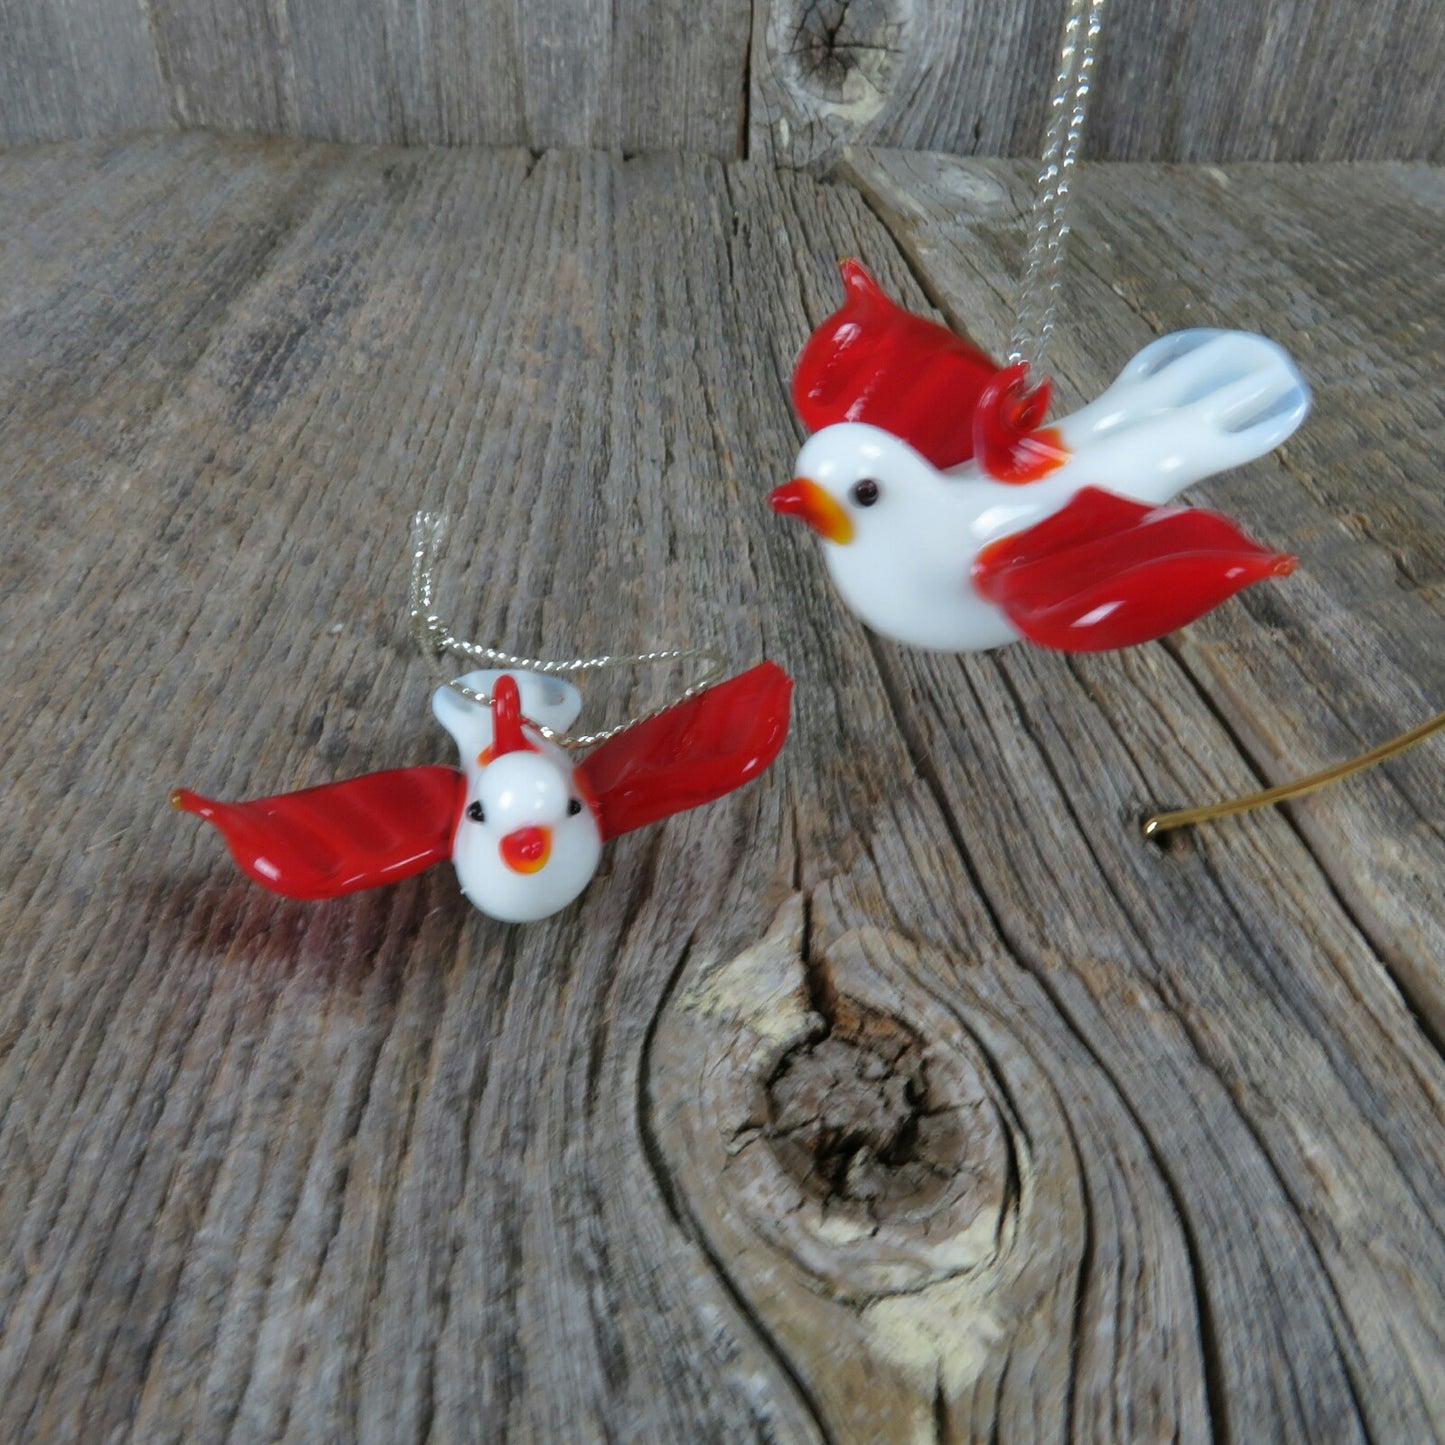 Vintage Glass Birds Christmas Ornament Lot of 2 Red White Silver Loops - At Grandma's Table